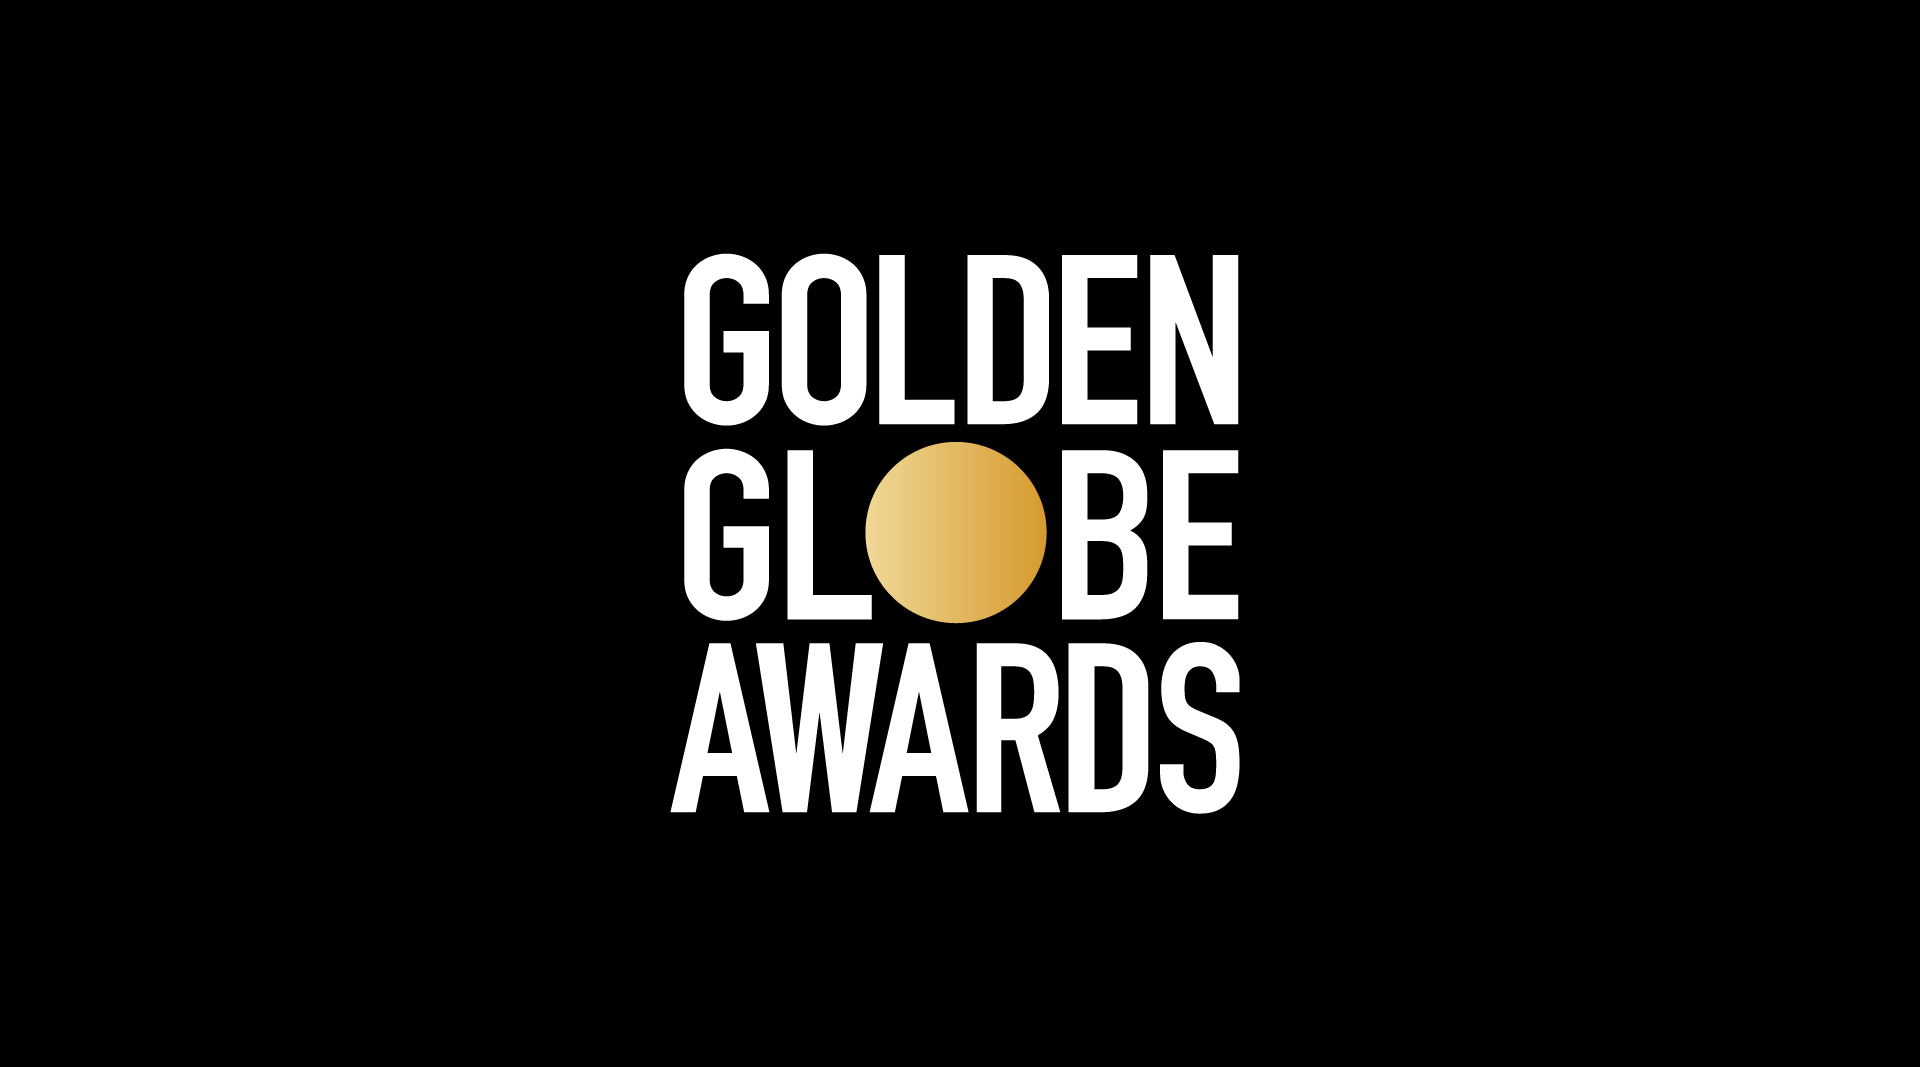 How to Watch the Golden Globes on February 28